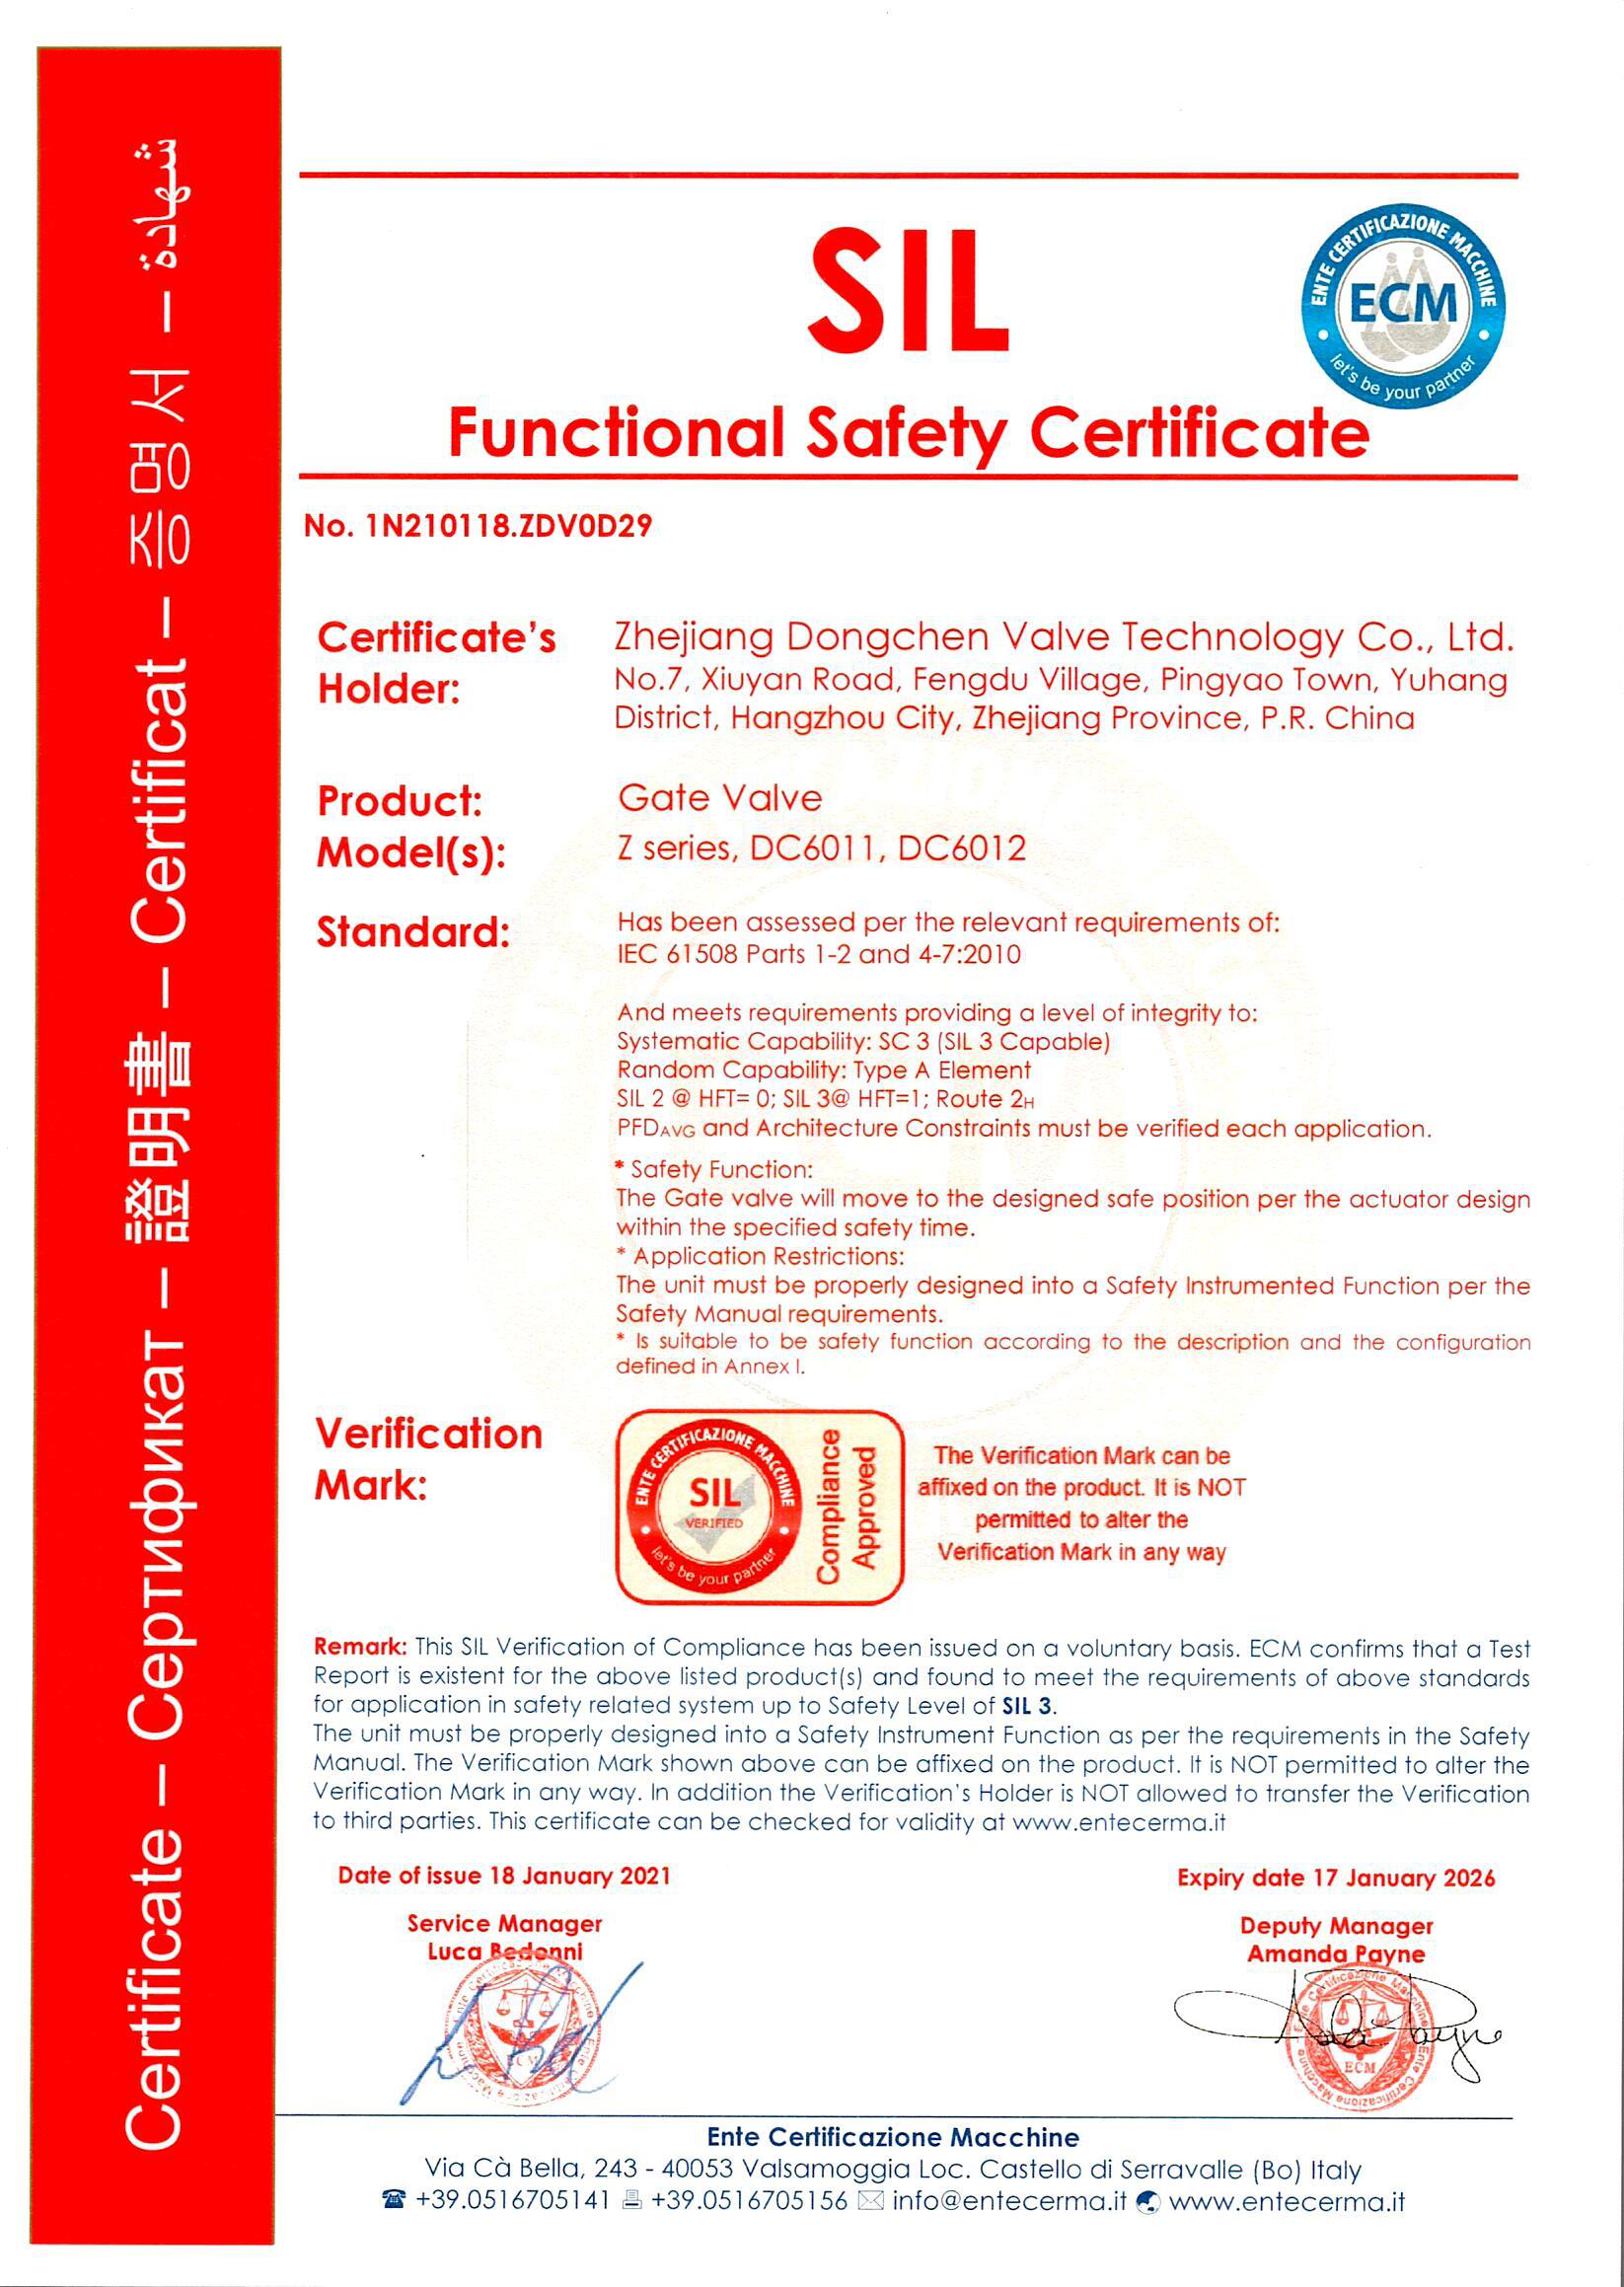 Functional safety certificate